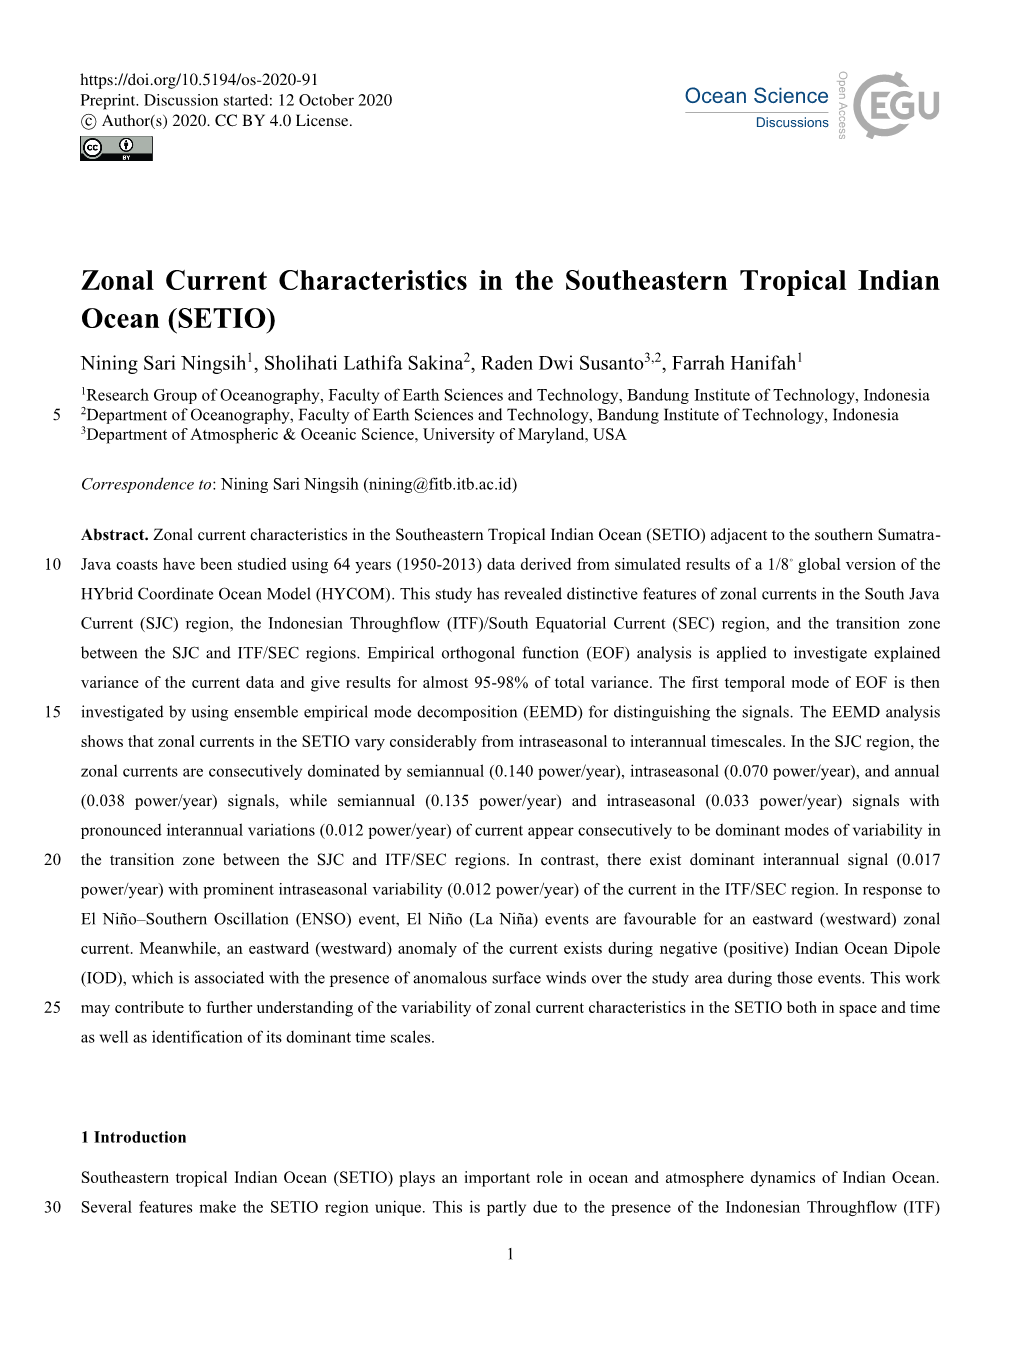 Zonal Current Characteristics in the Southeastern Tropical Indian